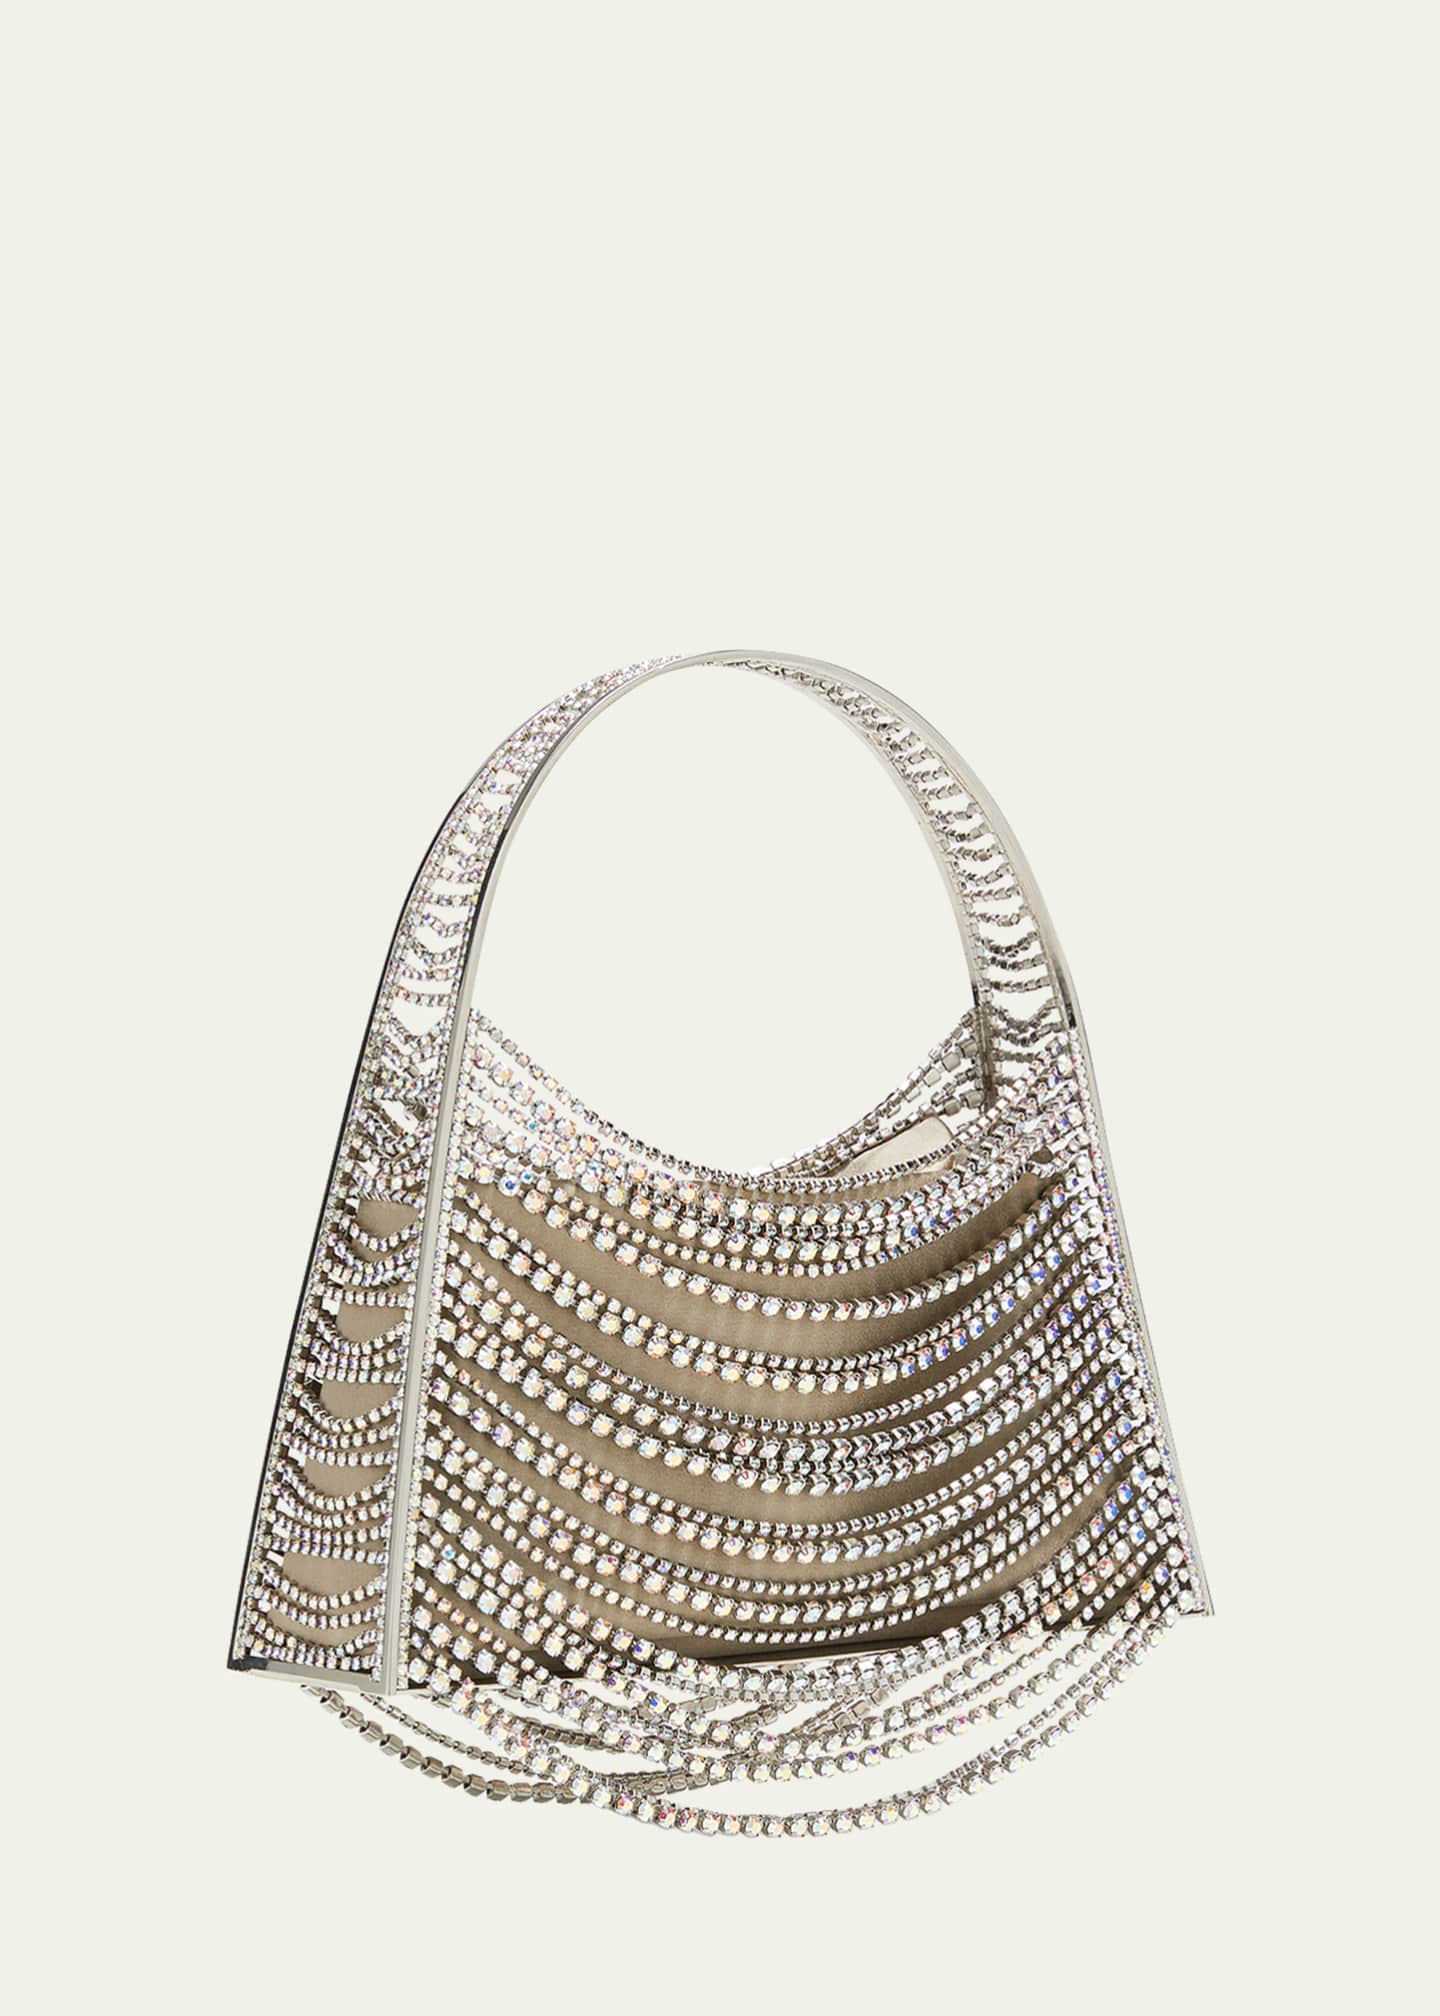 Benedetta Bruzziches Lucia in the Sky Crystal Top-Handle Bag